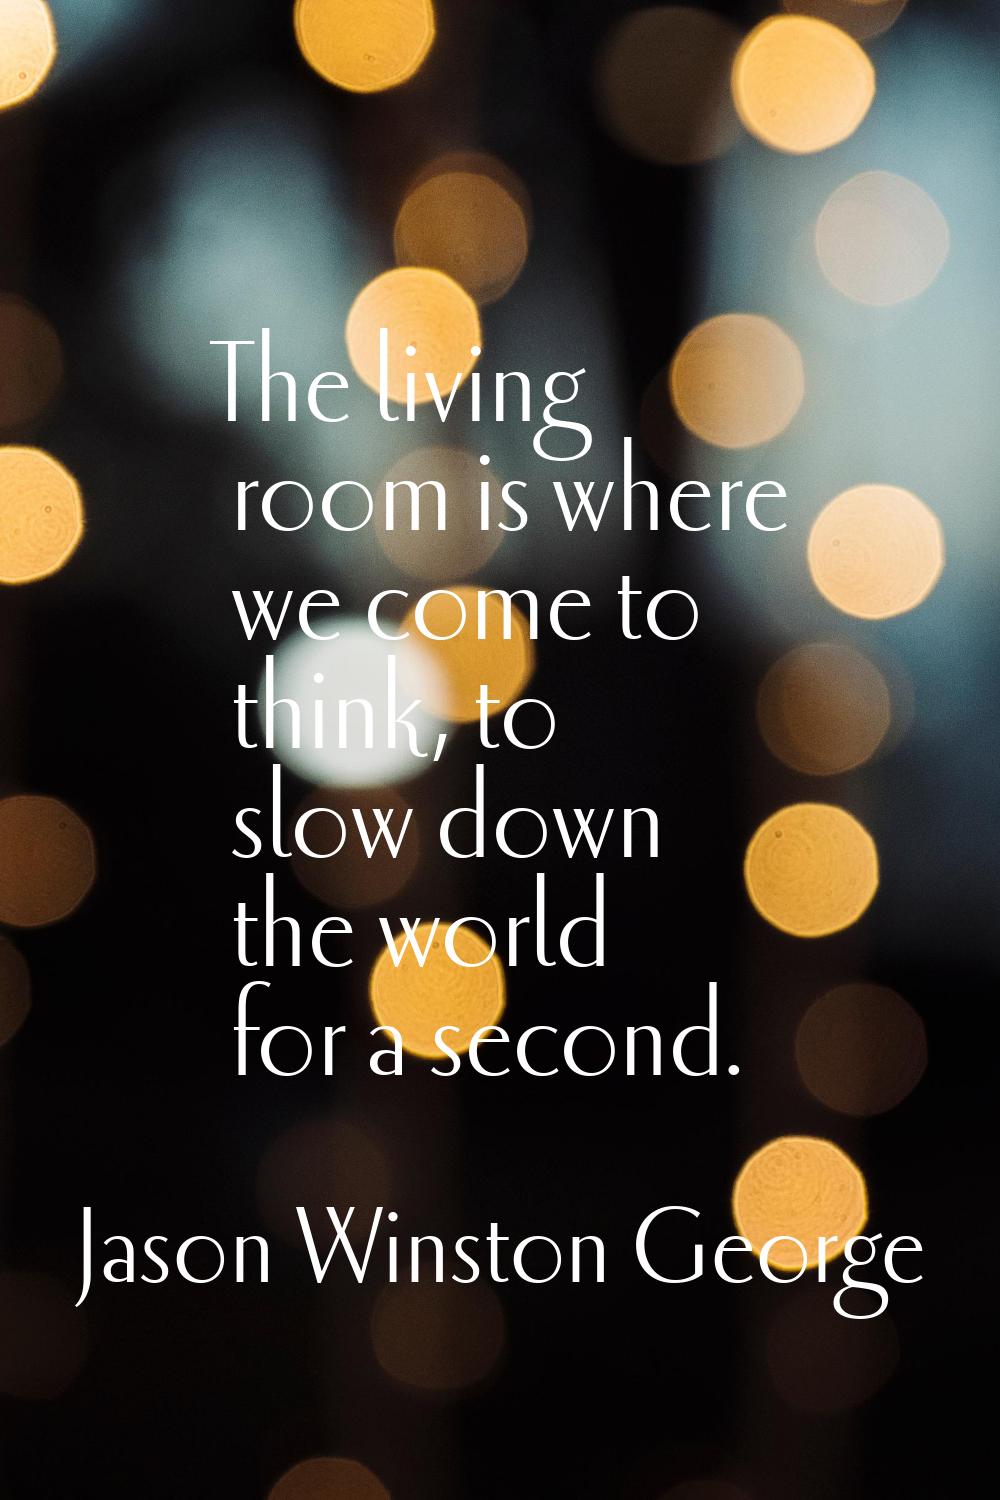 The living room is where we come to think, to slow down the world for a second.